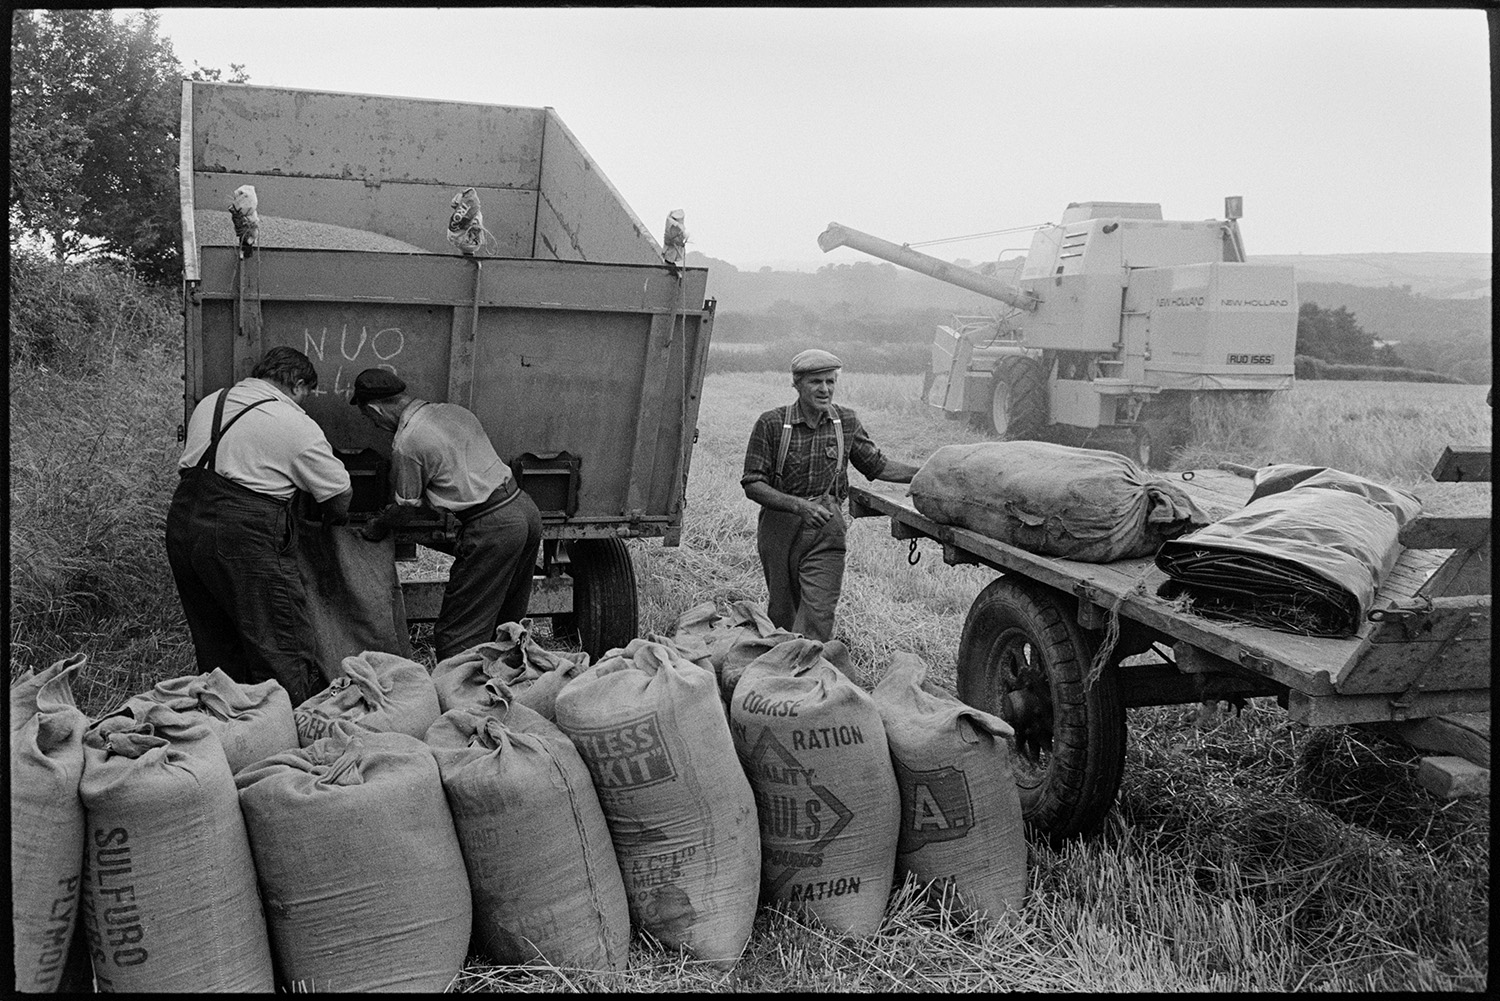 Farmers filling sacks with grain and loading onto trailer. 
[Alf Pugsley, Dennis Harris and another man filling sacks with grain from a high sided trailer in a field at Langham, Dolton. They are then loading the full sacks onto another trailer. A combine harvester can be seen in the field in the background.]